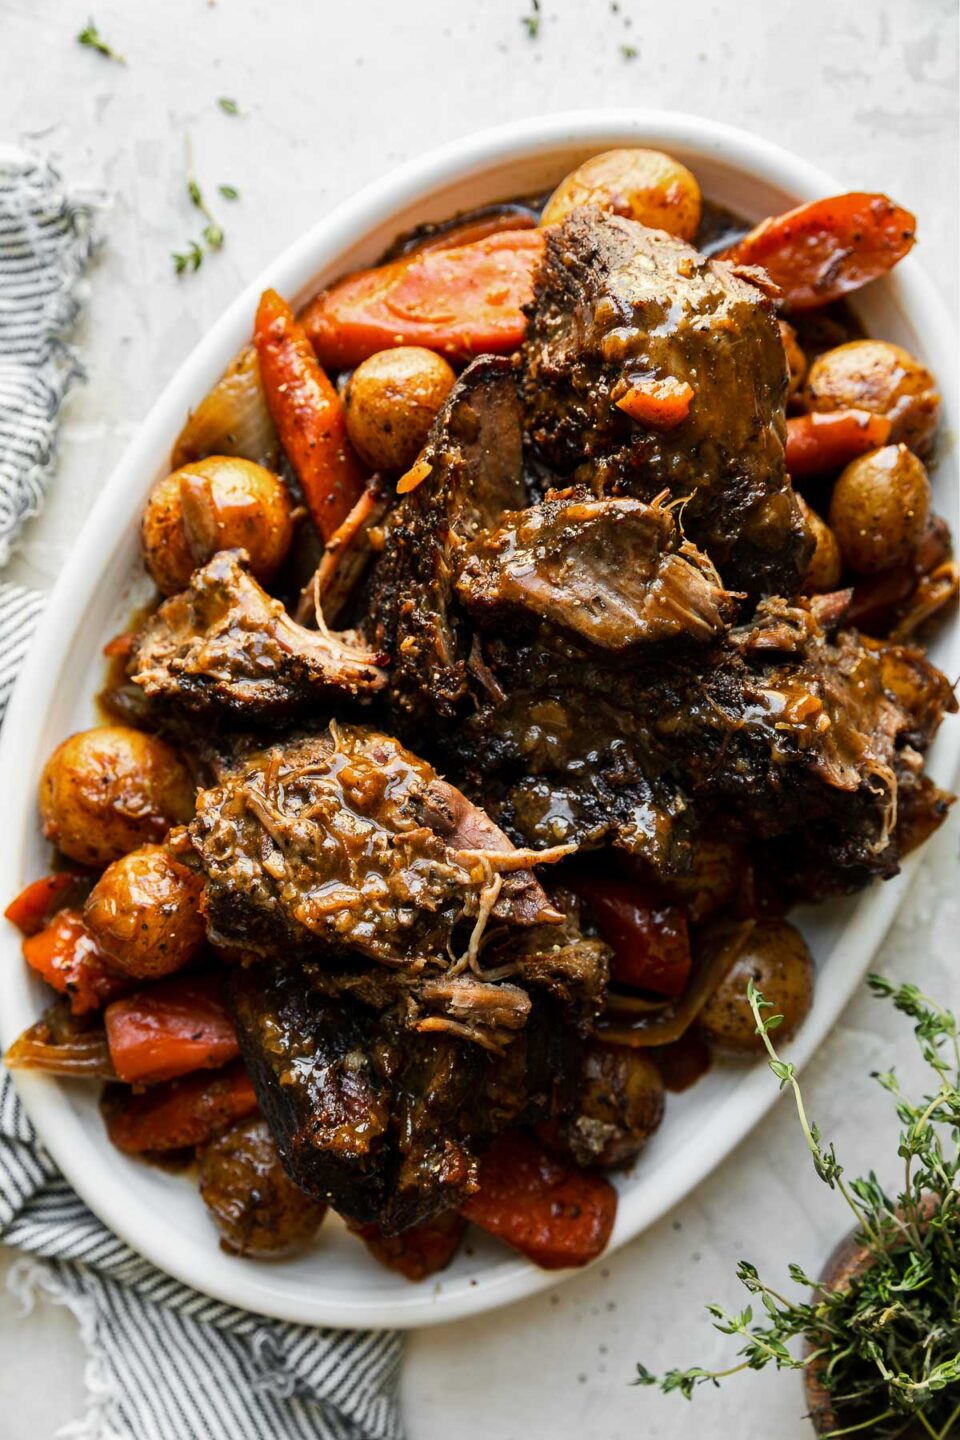 Braised pot roast with vegetables are plated for serving atop a white platter. The platter sits atop a creamy white textured surface with a blue and white striped linen napkin and a small wooden pinch bowl filled with fresh thyme surrounding the platter.